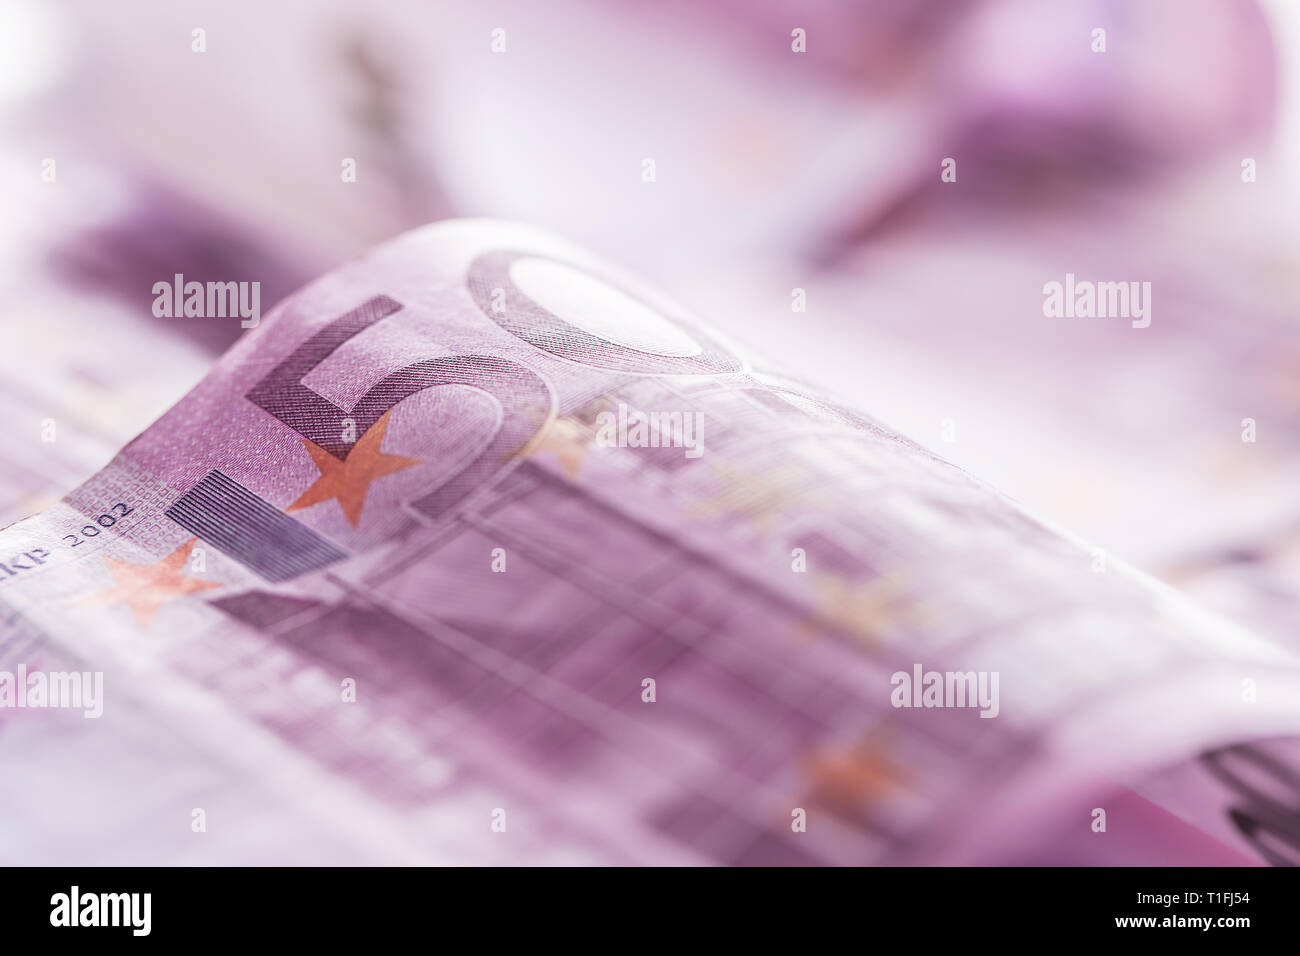 Close-up five houndred euro banknotes money and currency Stock Photo